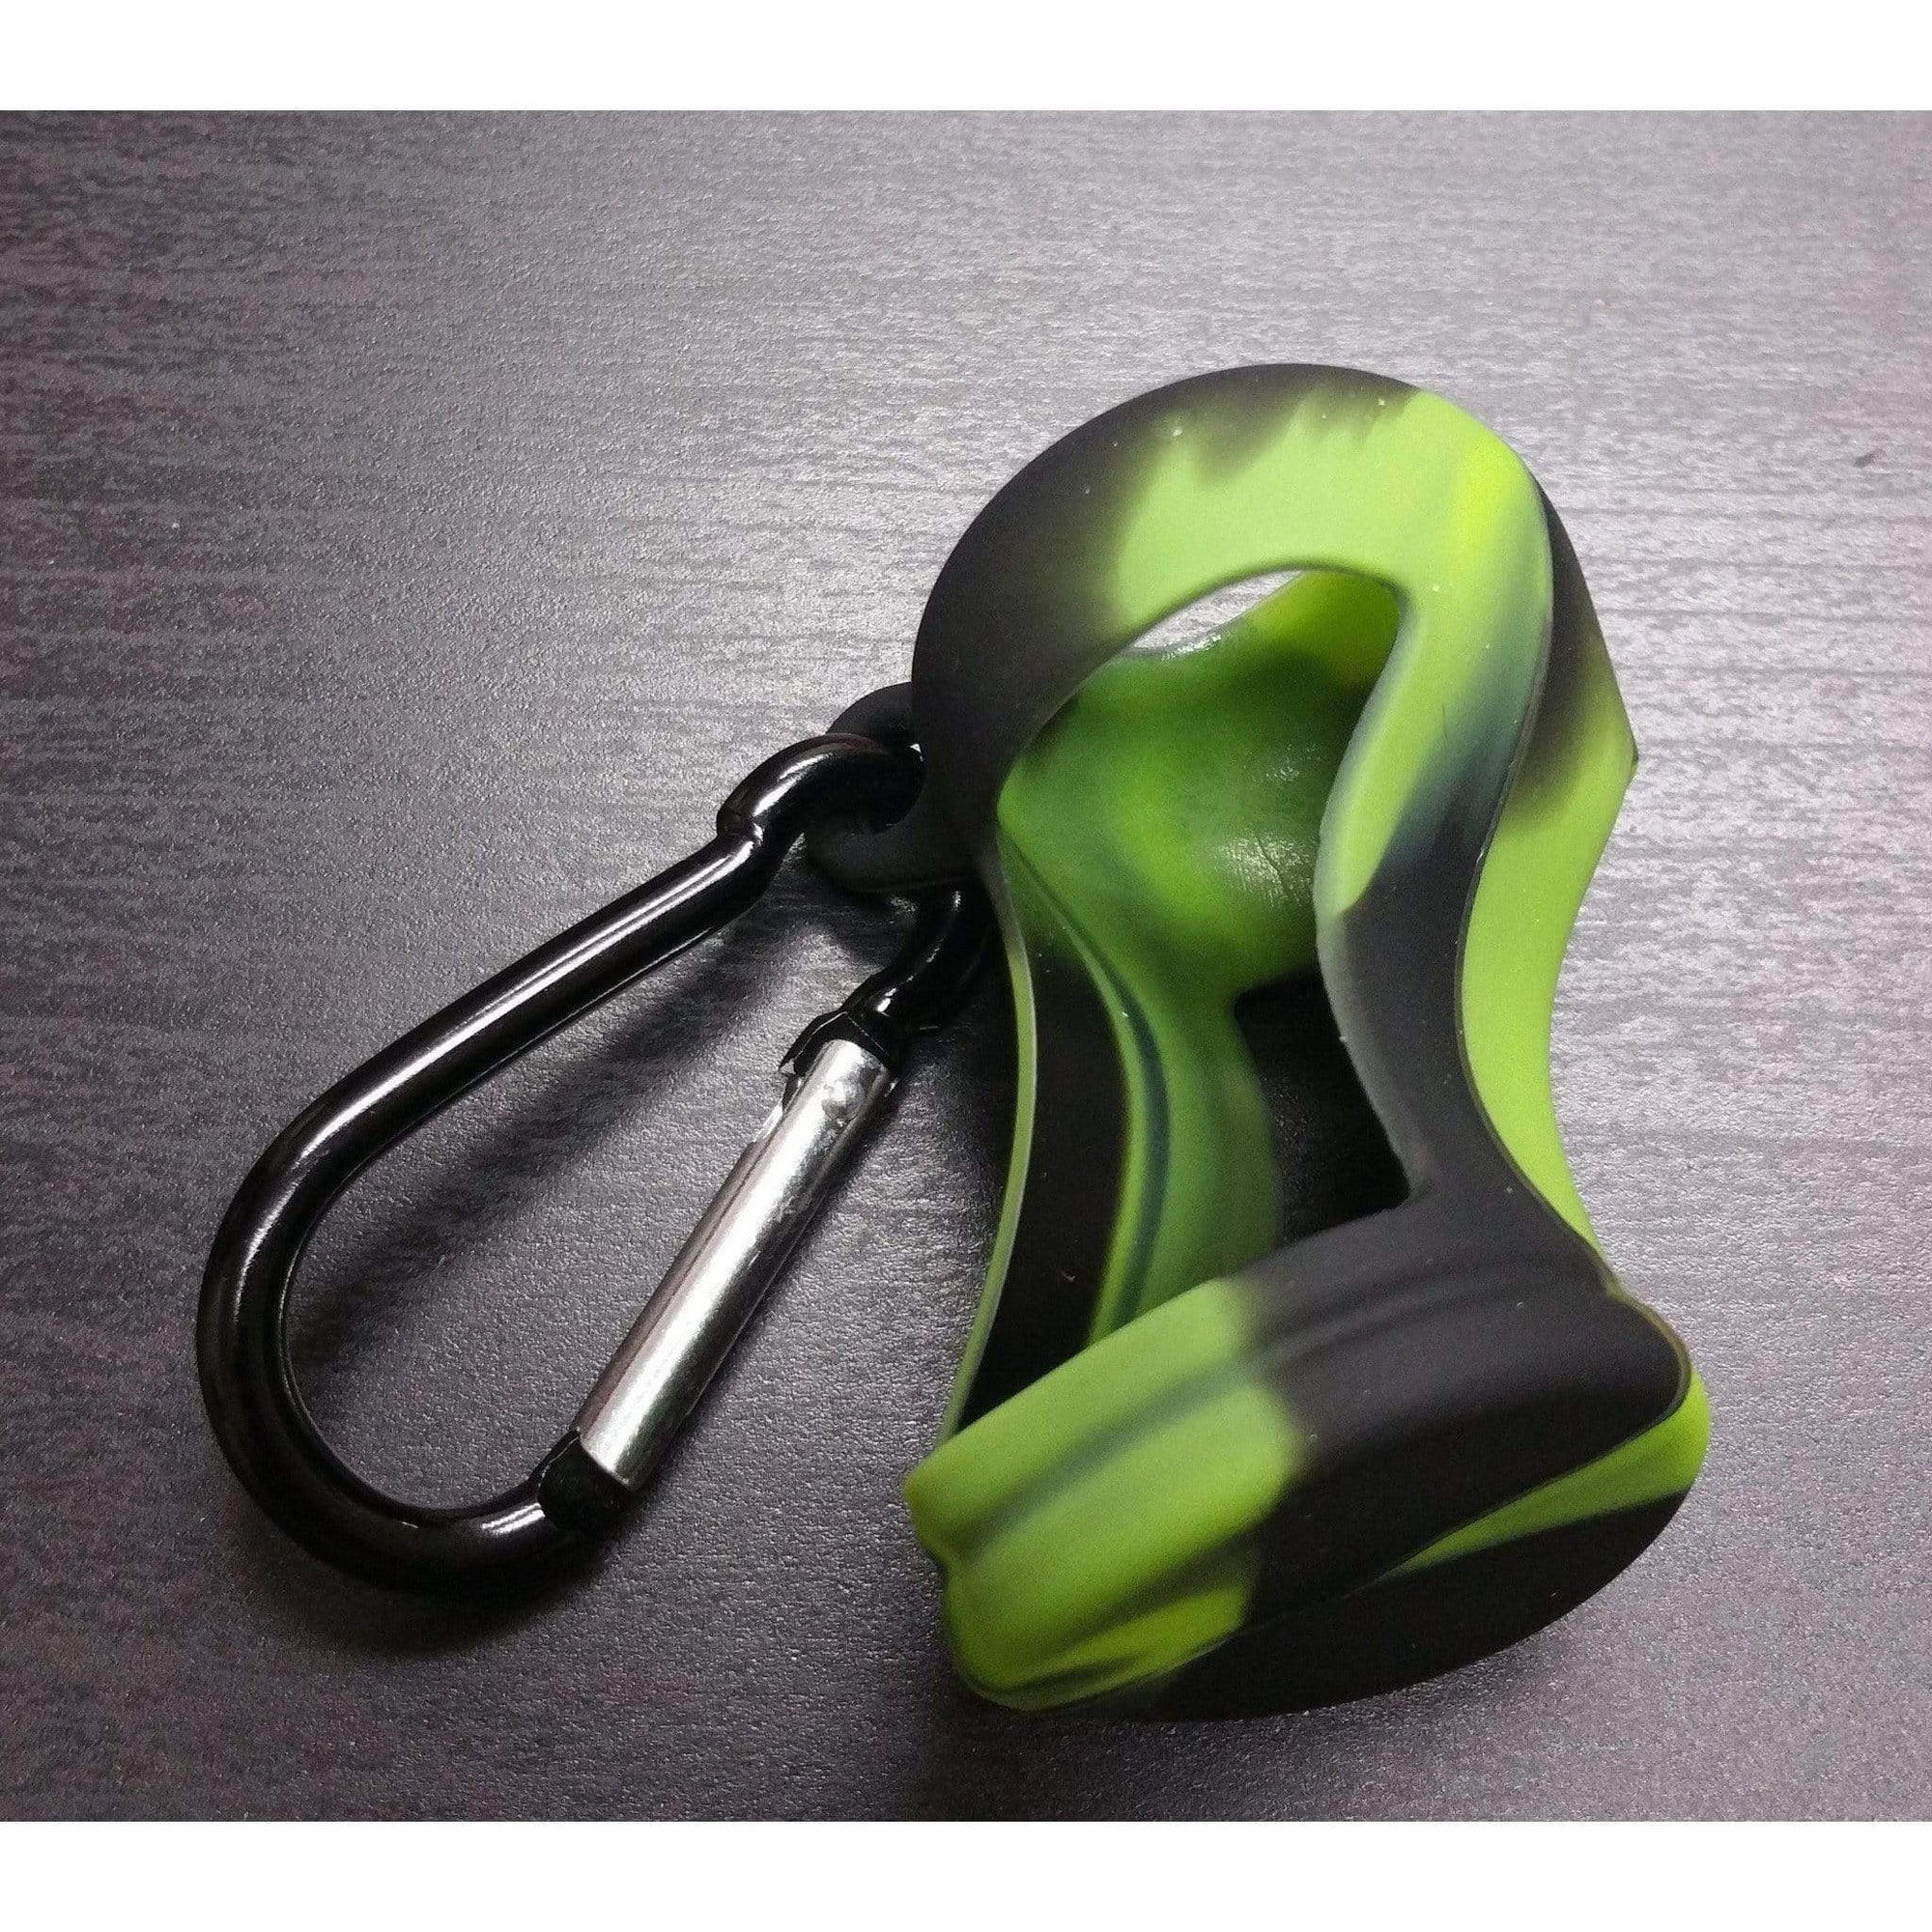 Silicone Sleeve Case for 30ml E-liquid Bottle Green and Black Silicone Cases